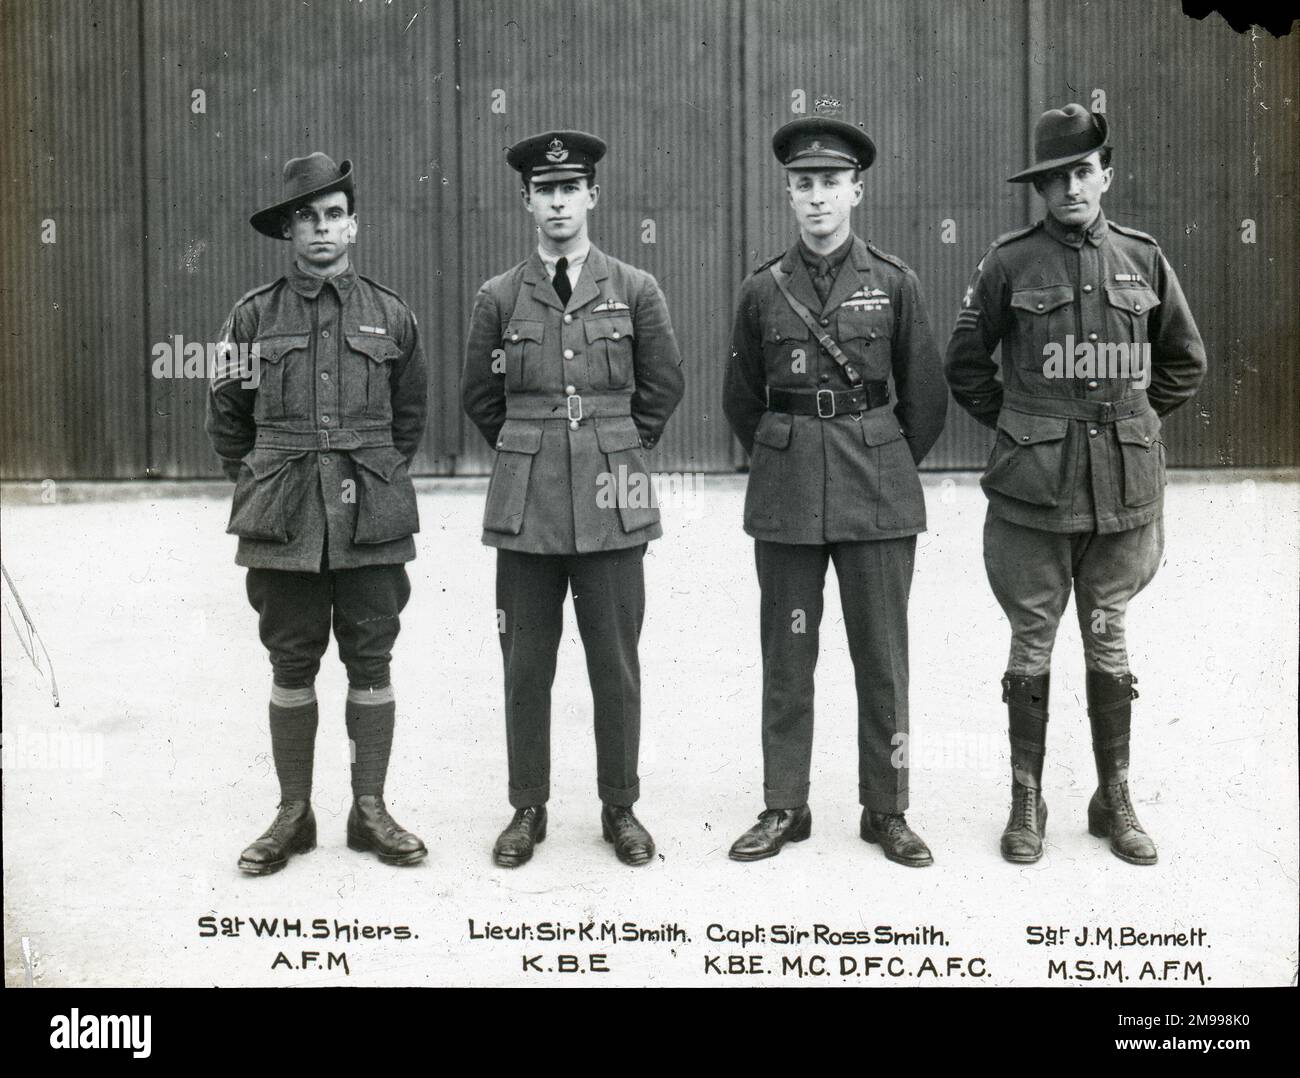 From left: Sgt W.H. Shiers, AFM; Lt Sir Keith M. Smith, KBE; Capt Sir Ross Smith, MC, DFC, AFC; and Sgt J.M. Bennett, MSM, AFM. Stock Photo